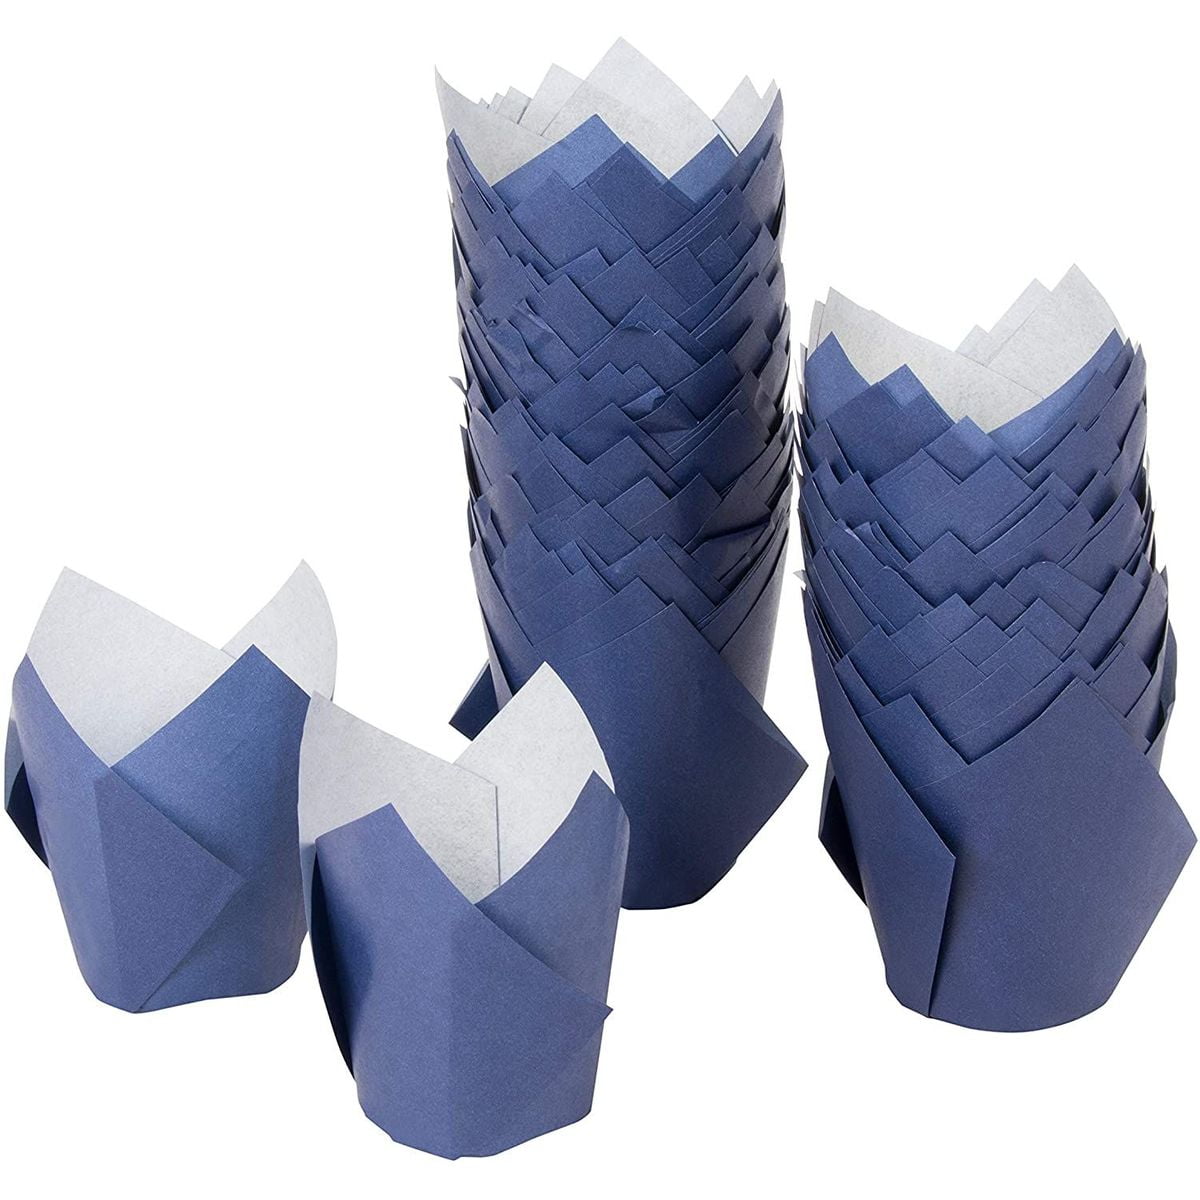 Restaurants Perfect for Birthday Parties Navy Blue Baby Showers Tulip Cupcake Liners Catering 100-Pack Medium Baking Cups Bakeries Weddings Muffin Wrappers